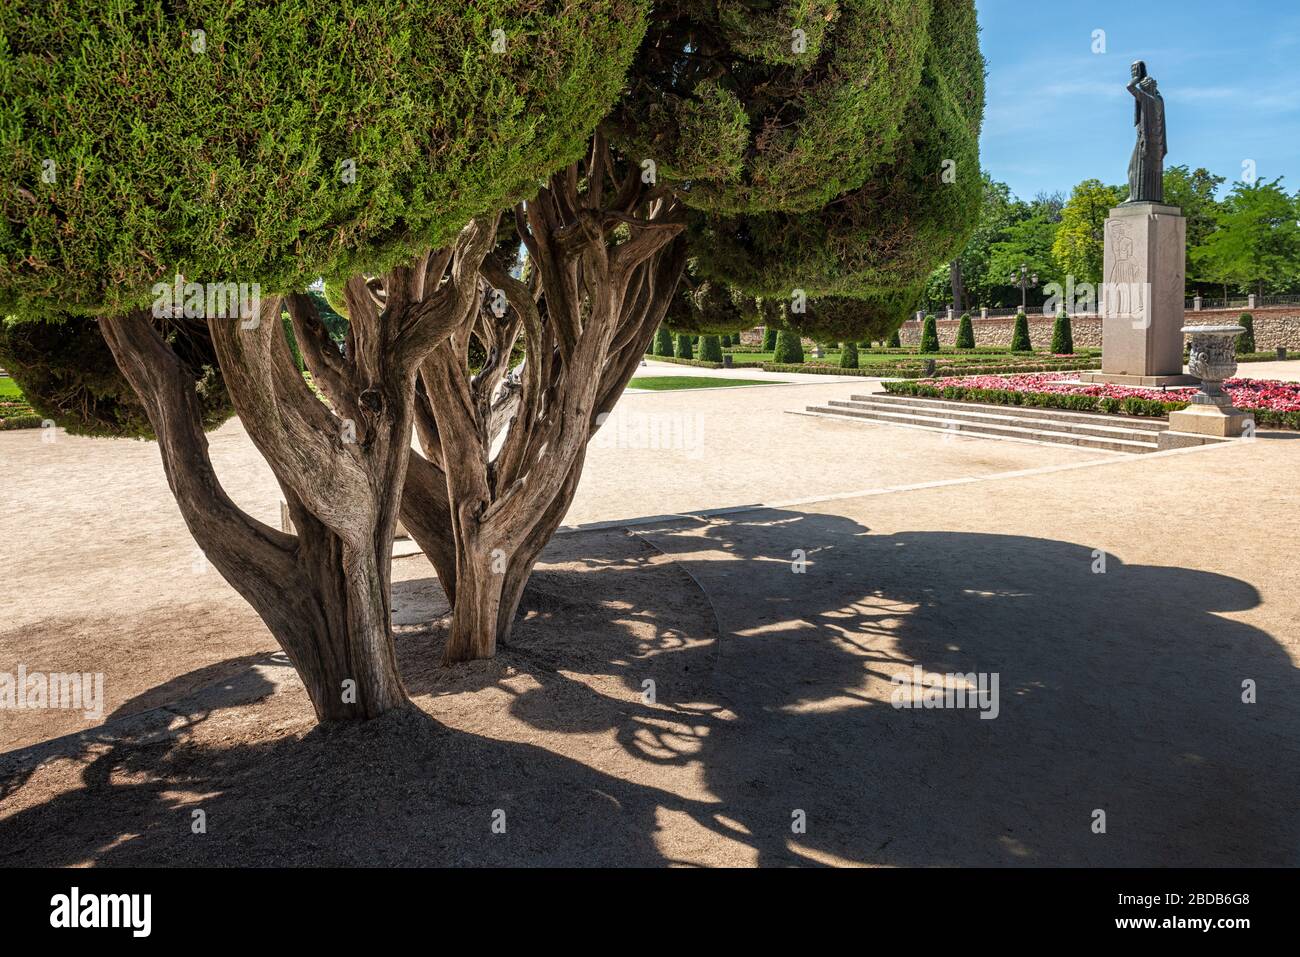 Madrid (Spain): Unusual shaped Cypress tree in the Park of Buen Retiro with statue in distance Stock Photo